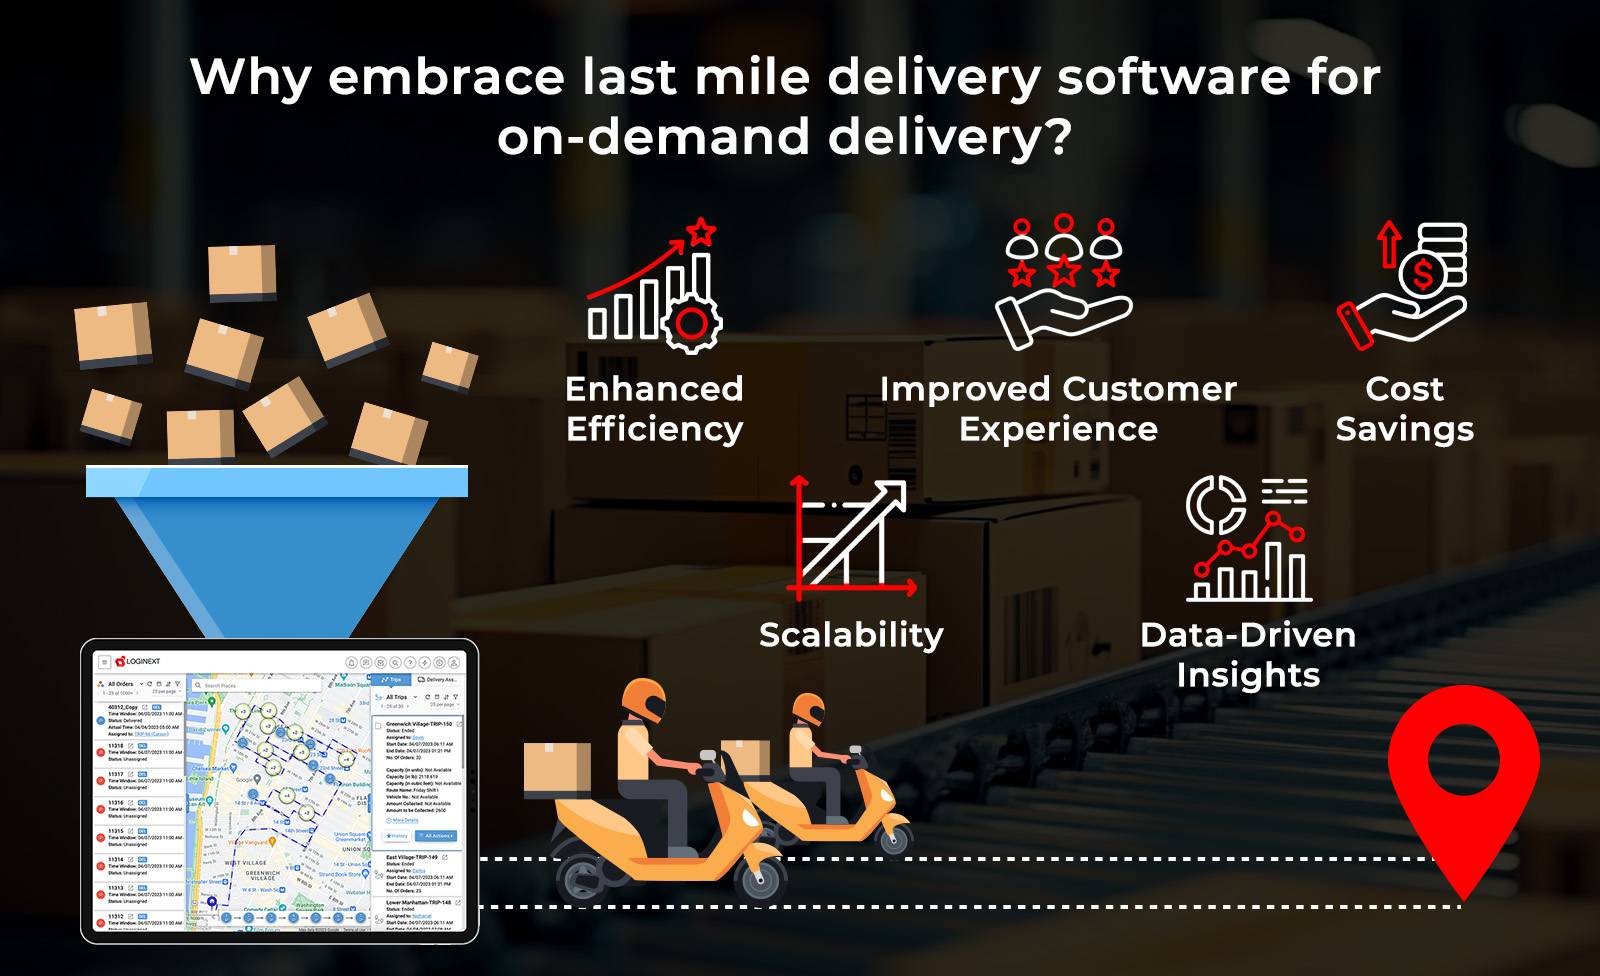 How to improve your on-demand delivery?